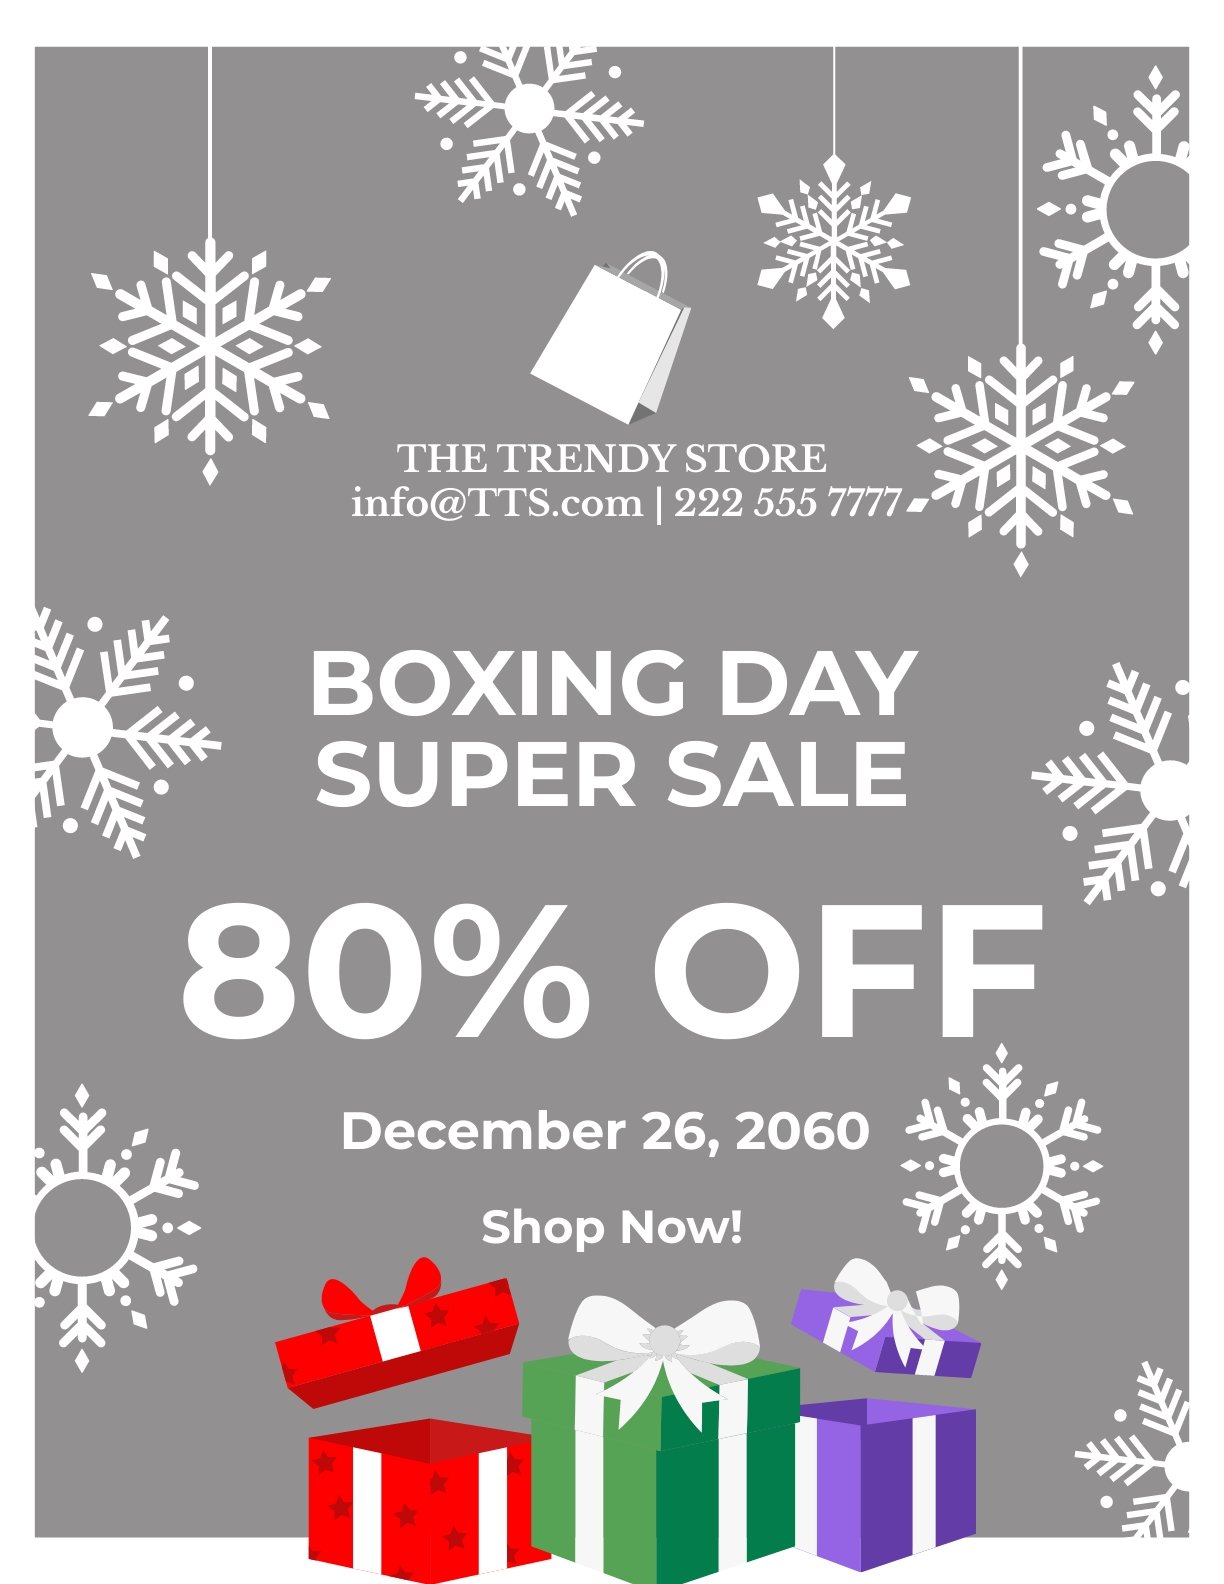 Free Boxing Day Advertising Flyer